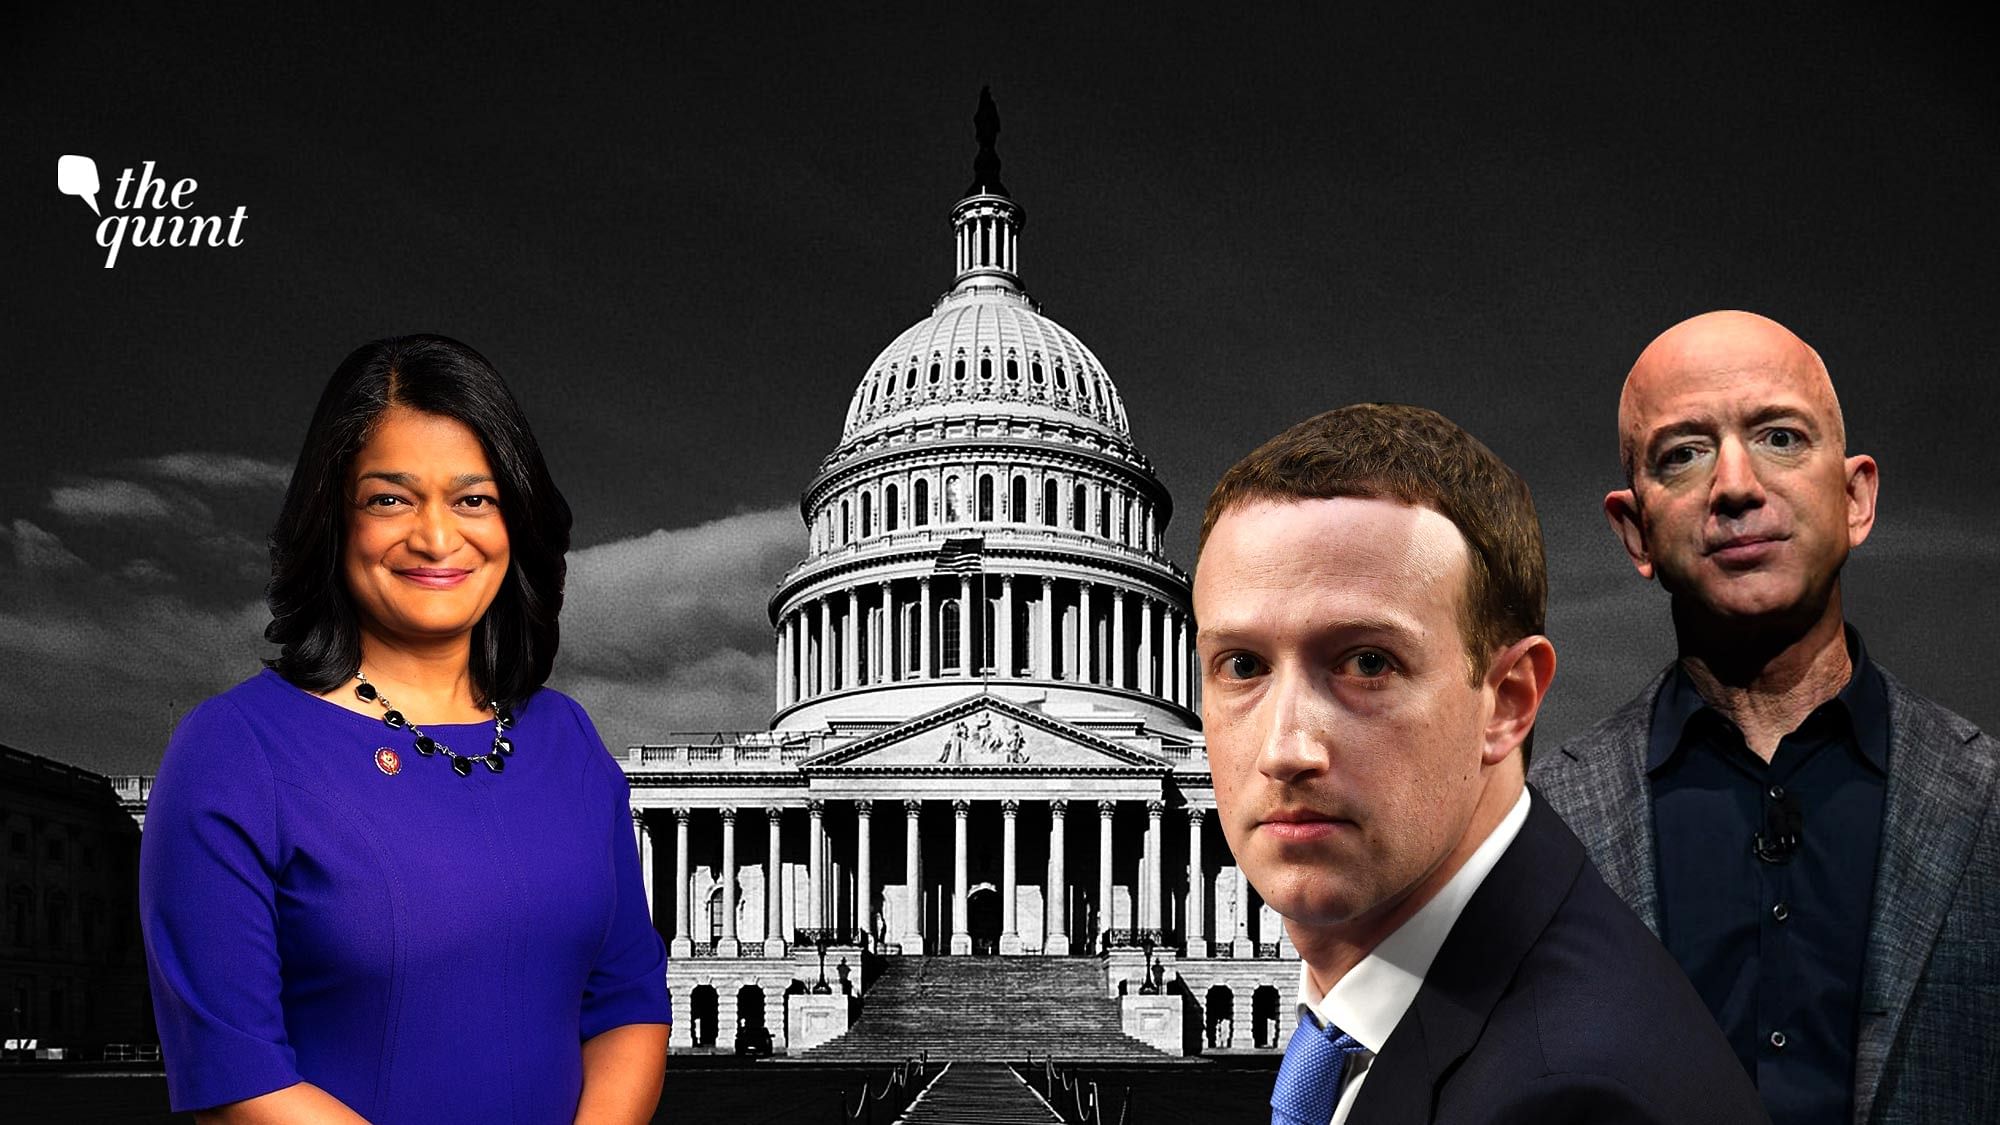 Among the 15-member sub-committee that investigated Amazon, Apple, Facebook and Google for over a year and led a fierce interrogation of their CEOs on Thursday was Representative Pramila Jayapal.